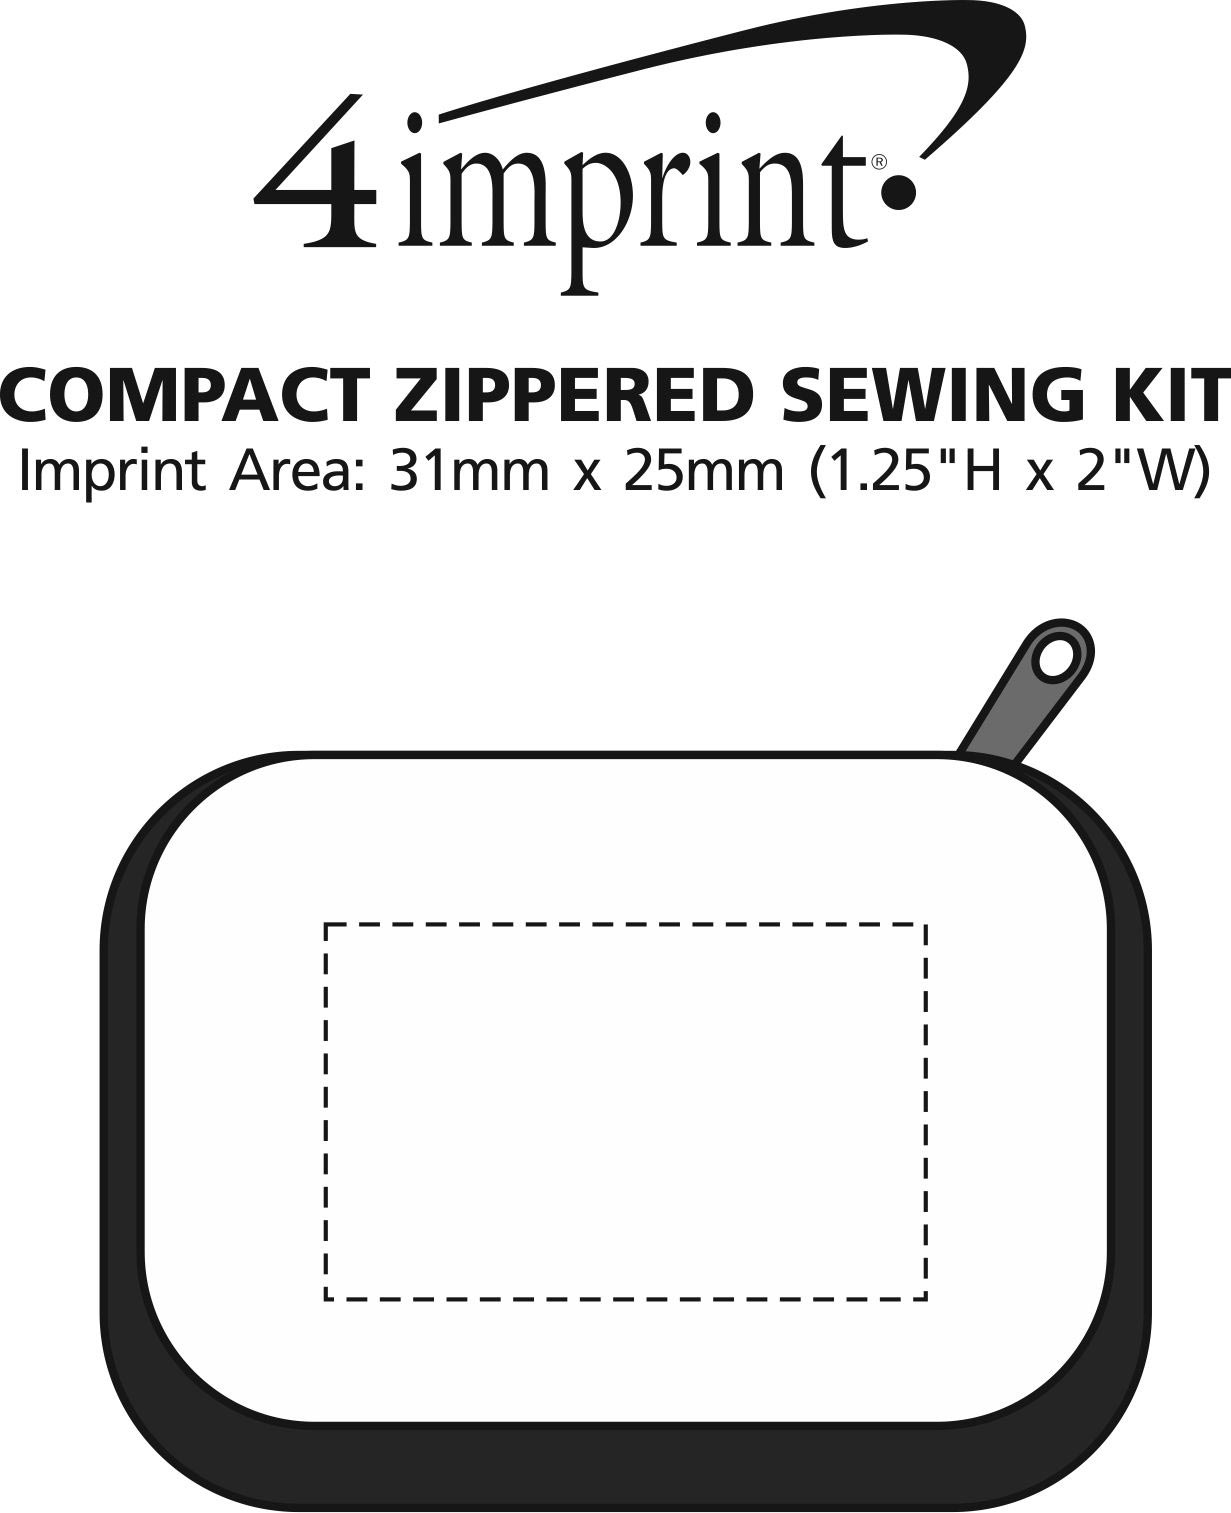 Imprint Area of Compact Zippered Sewing Kit